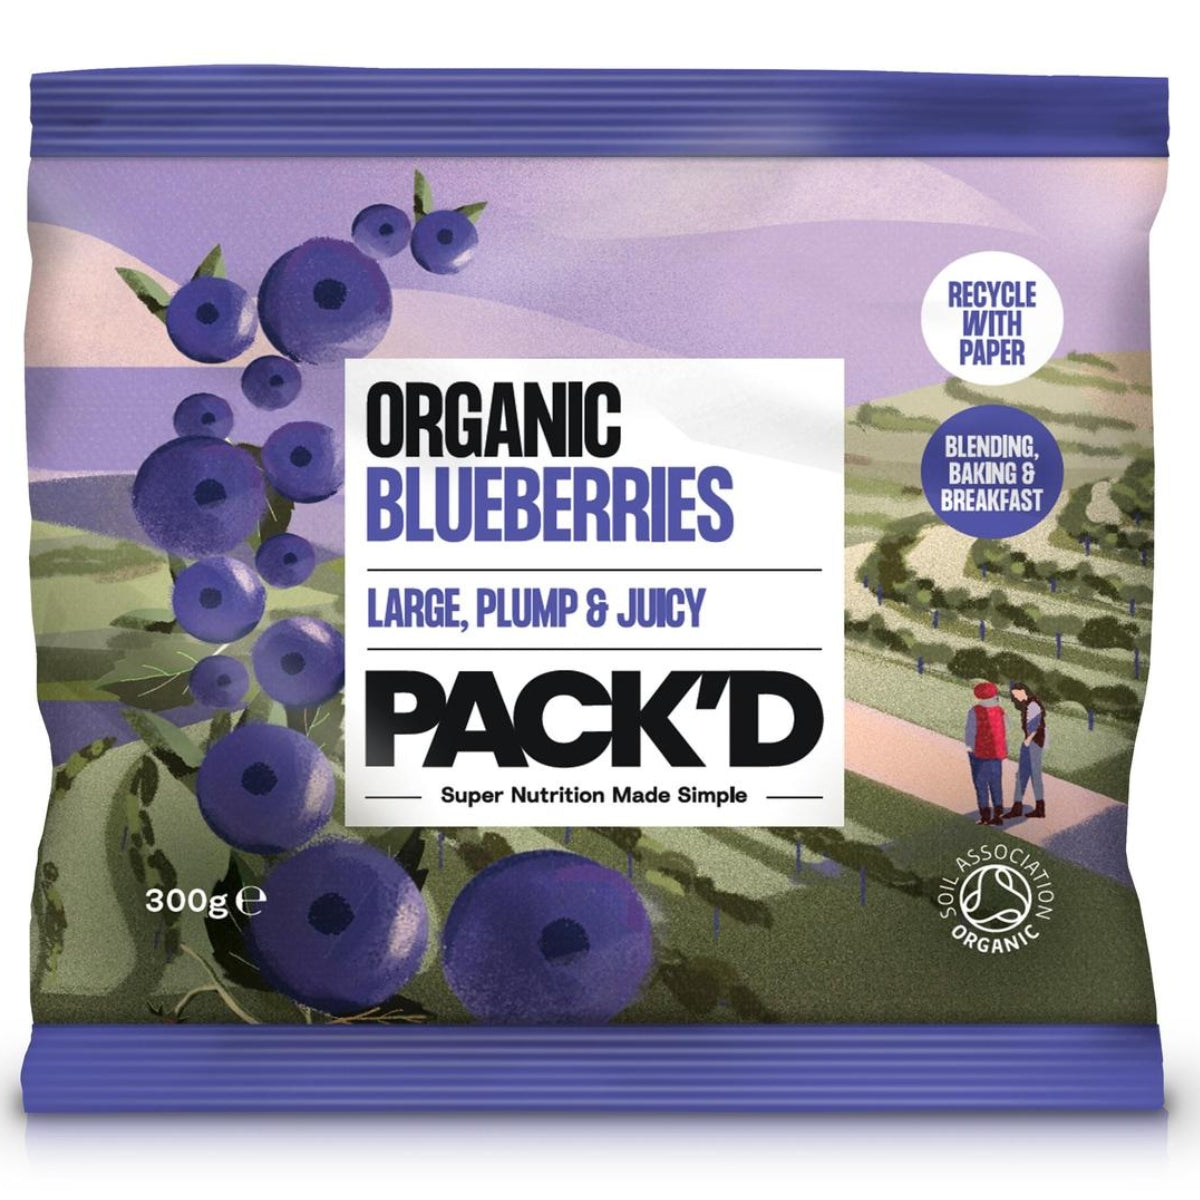 A Packd - Organic & Large Sun-Ripened Blueberries - 300g